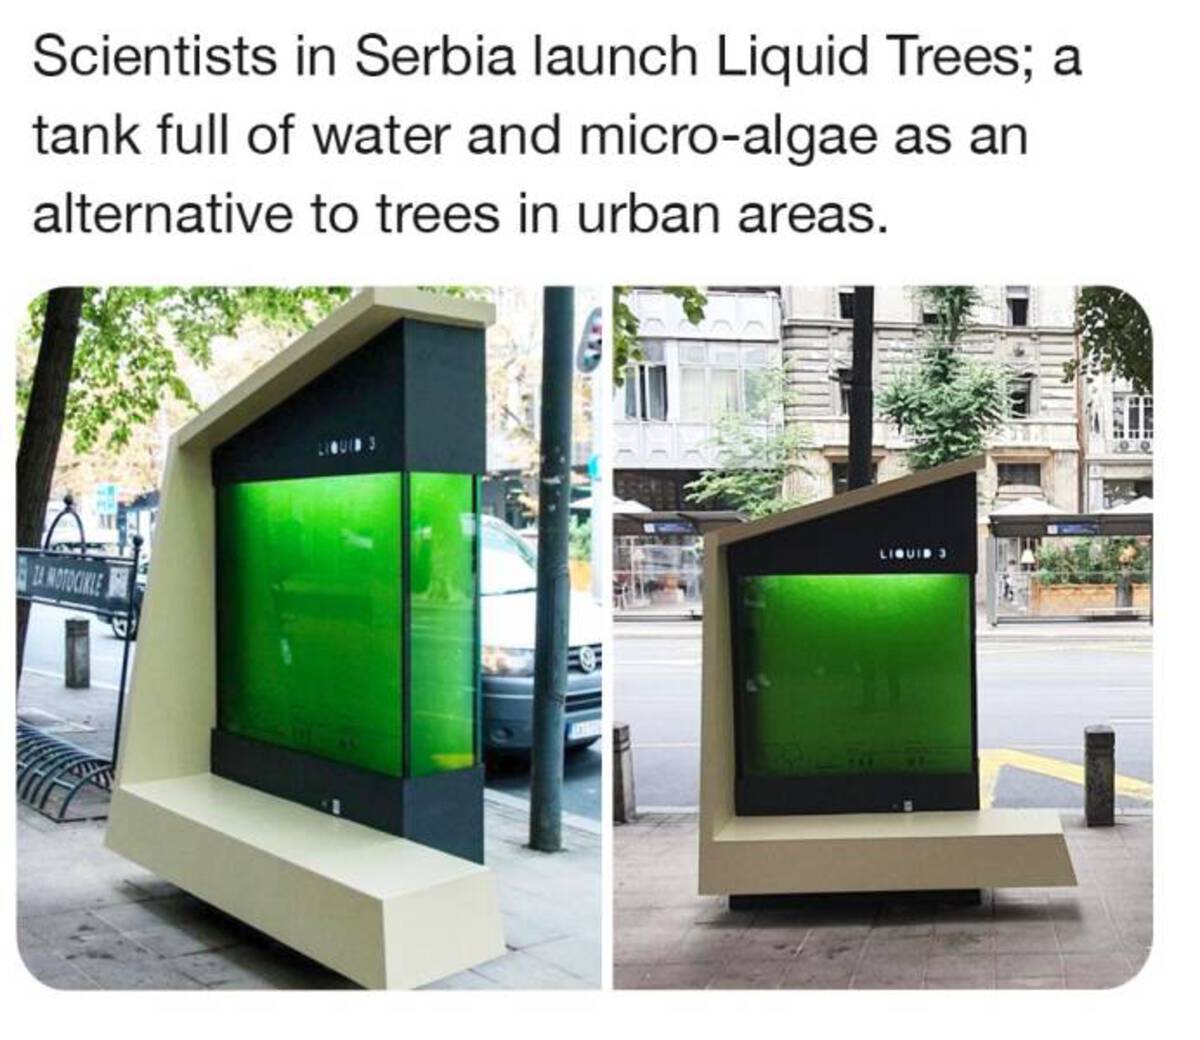 liquid tree serbia - Scientists in Serbia launch Liquid Trees; a tank full of water and microalgae as an alternative to trees in urban areas. Za Motocikle Liquid 3